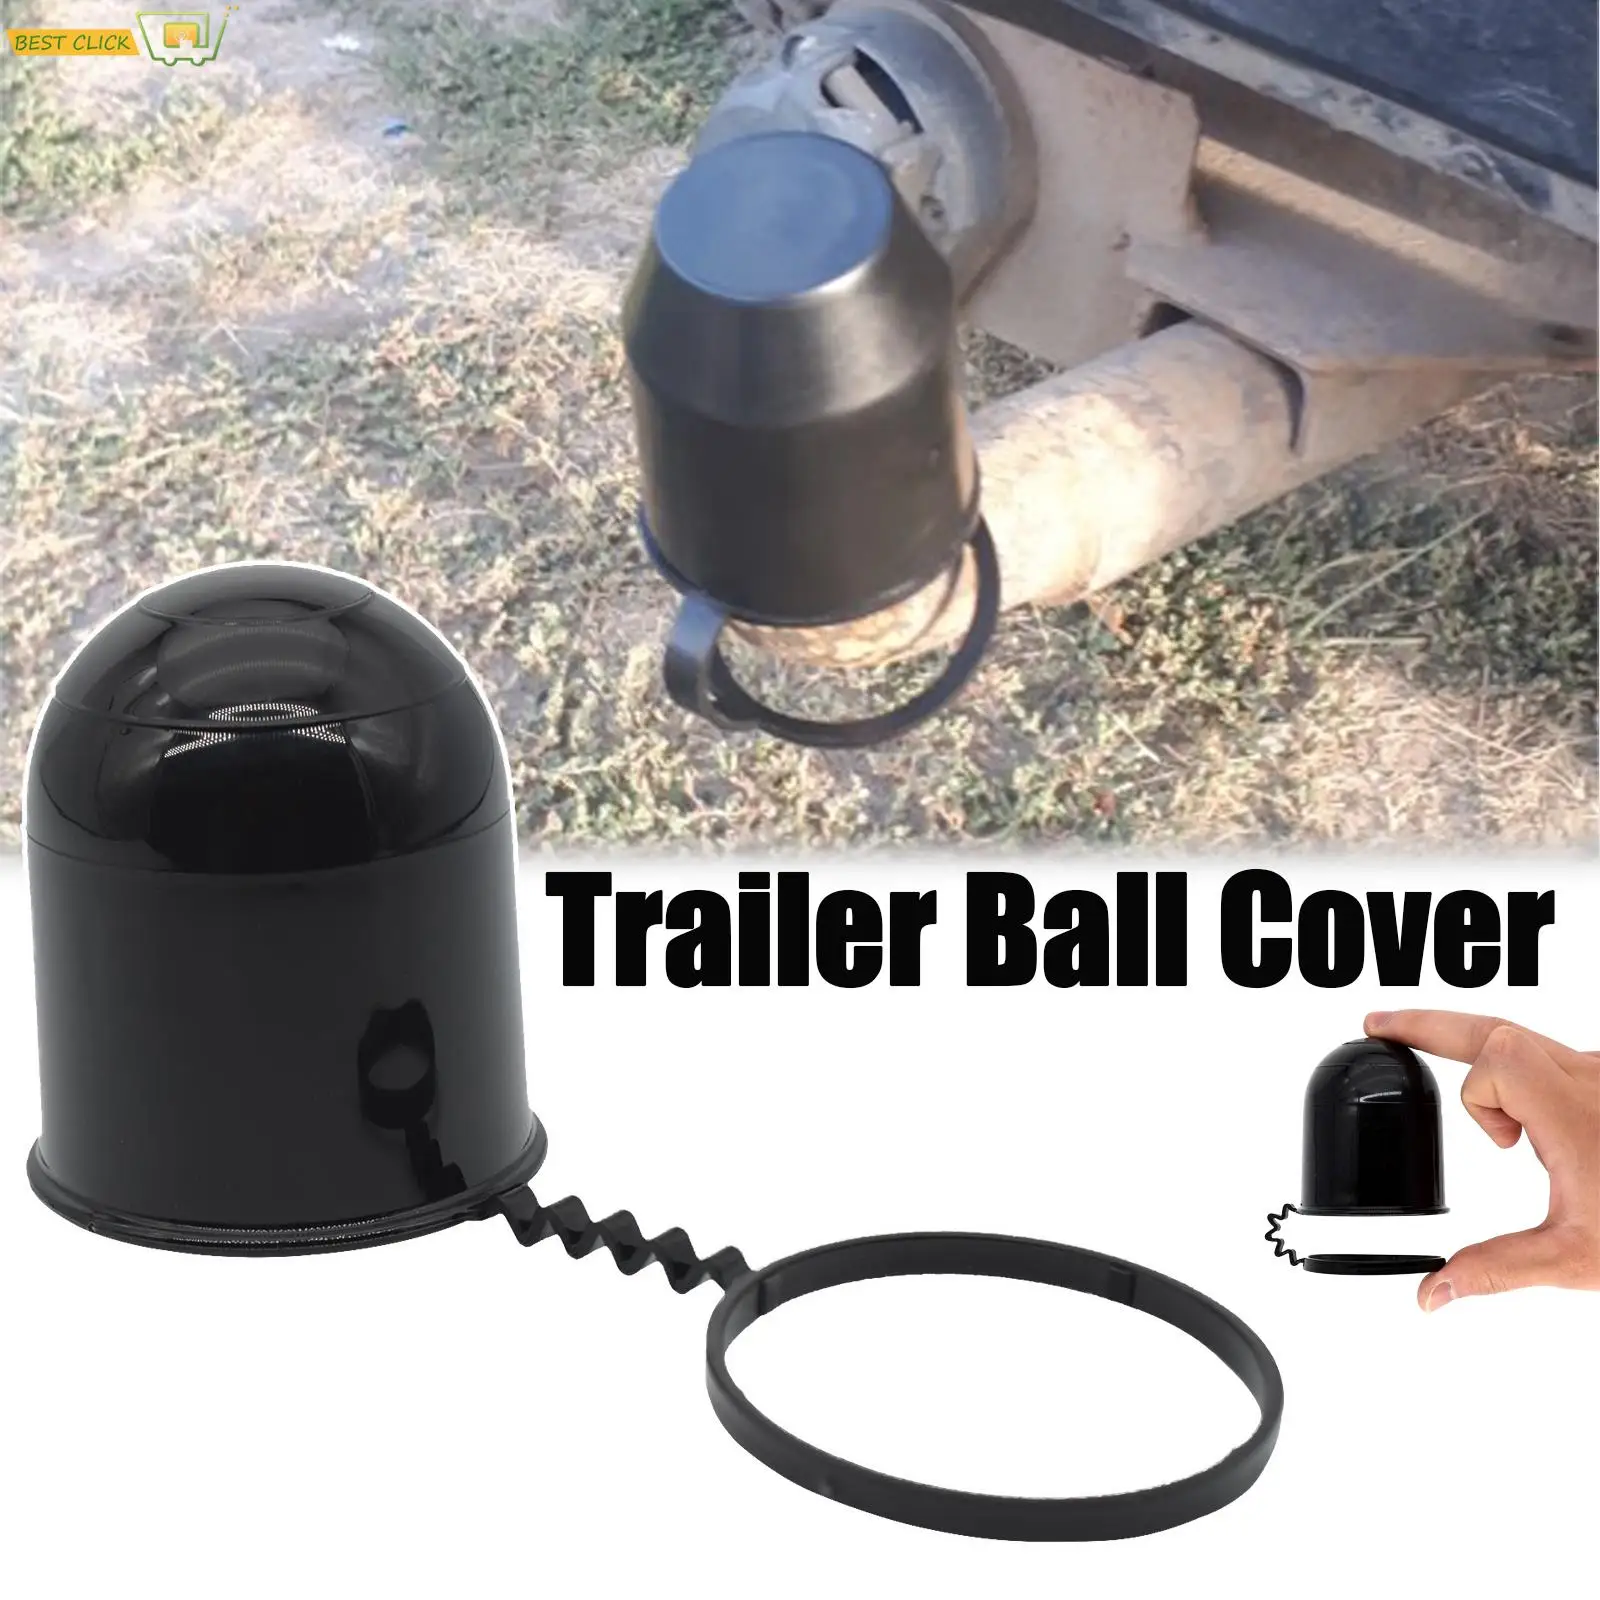 Prevent Falling Towing Hitch Tow Trailer Ball Cap Cover Caravan Trailer Protection Car Accessories Universal Black Durable 50MM